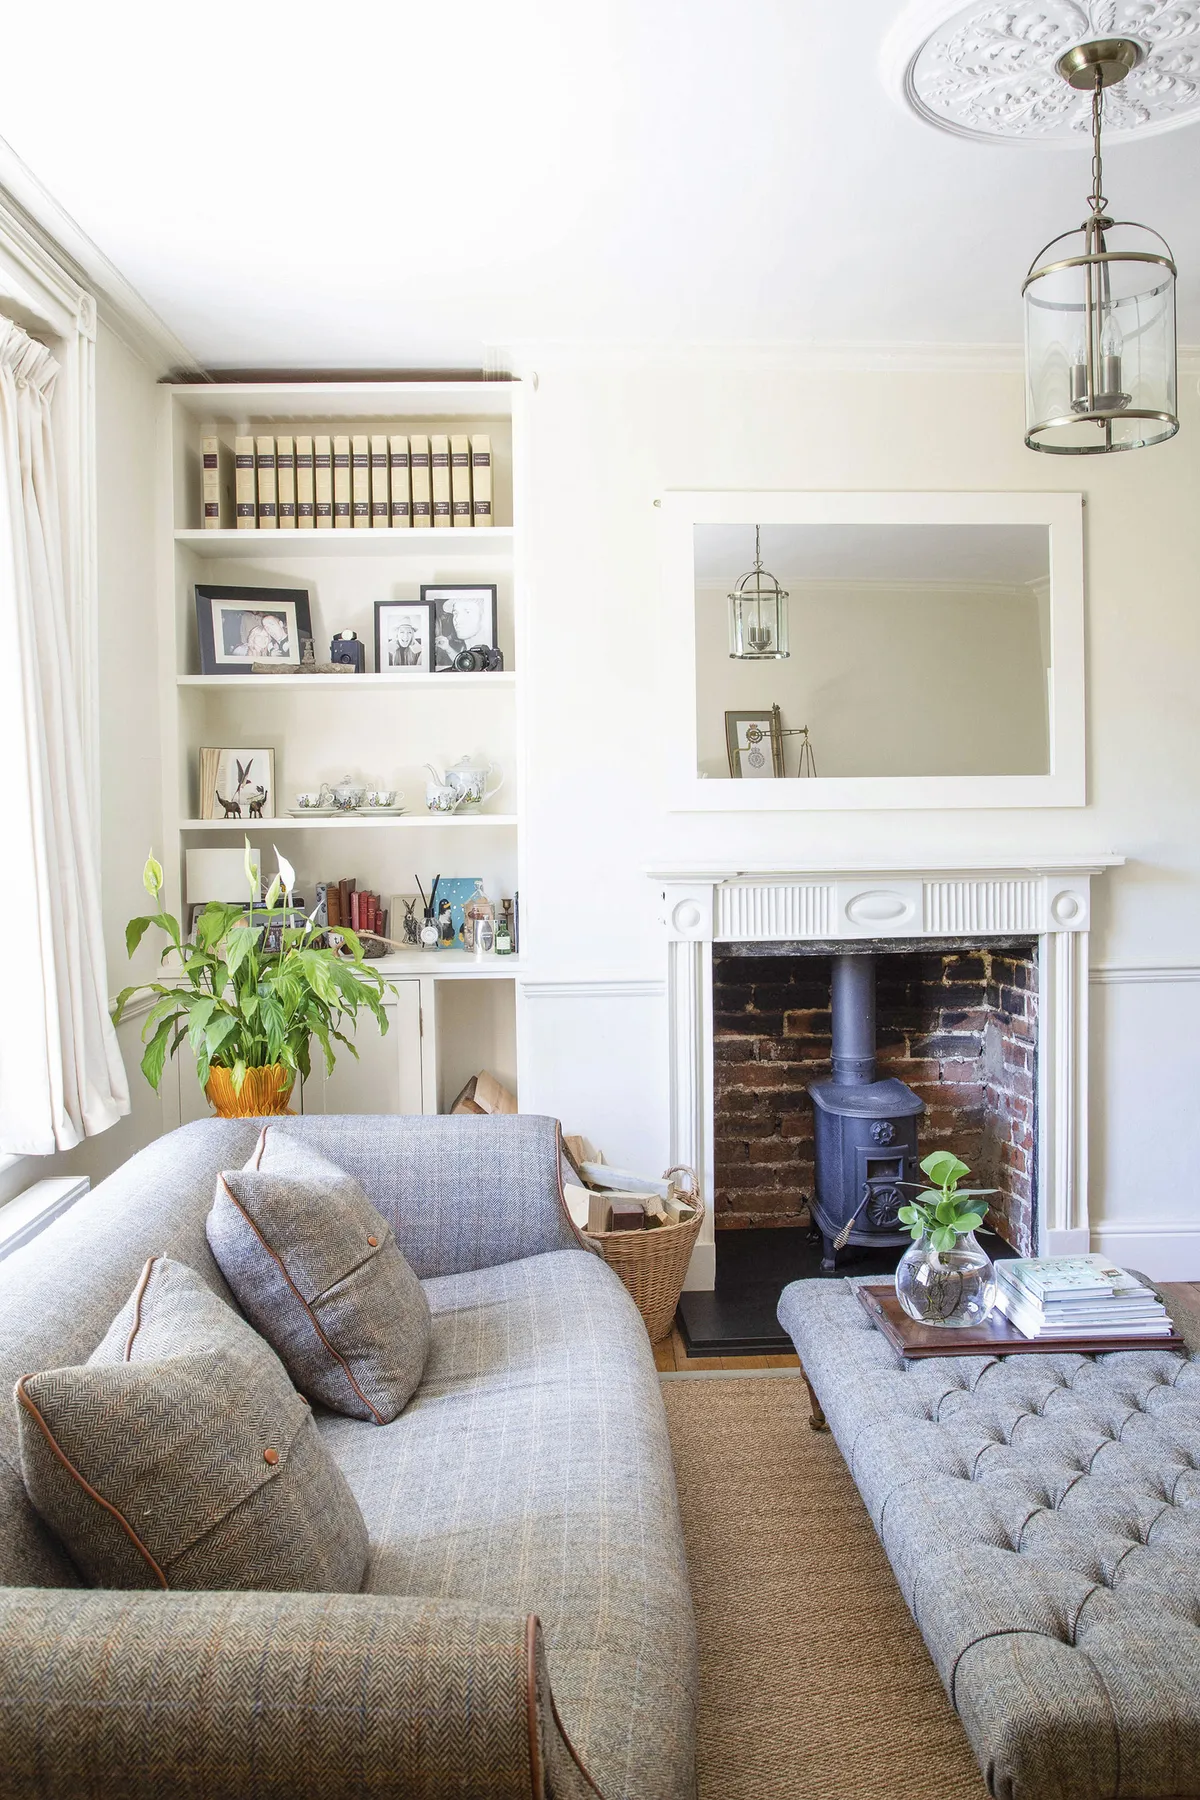 Vicky lightened the room with Farrow & Ball’s Lime White and White Tie, which draws the eye to the alcove treasures. The tweed sofas were from Jarrold, a Norwich-based department store, and add a traditional feel